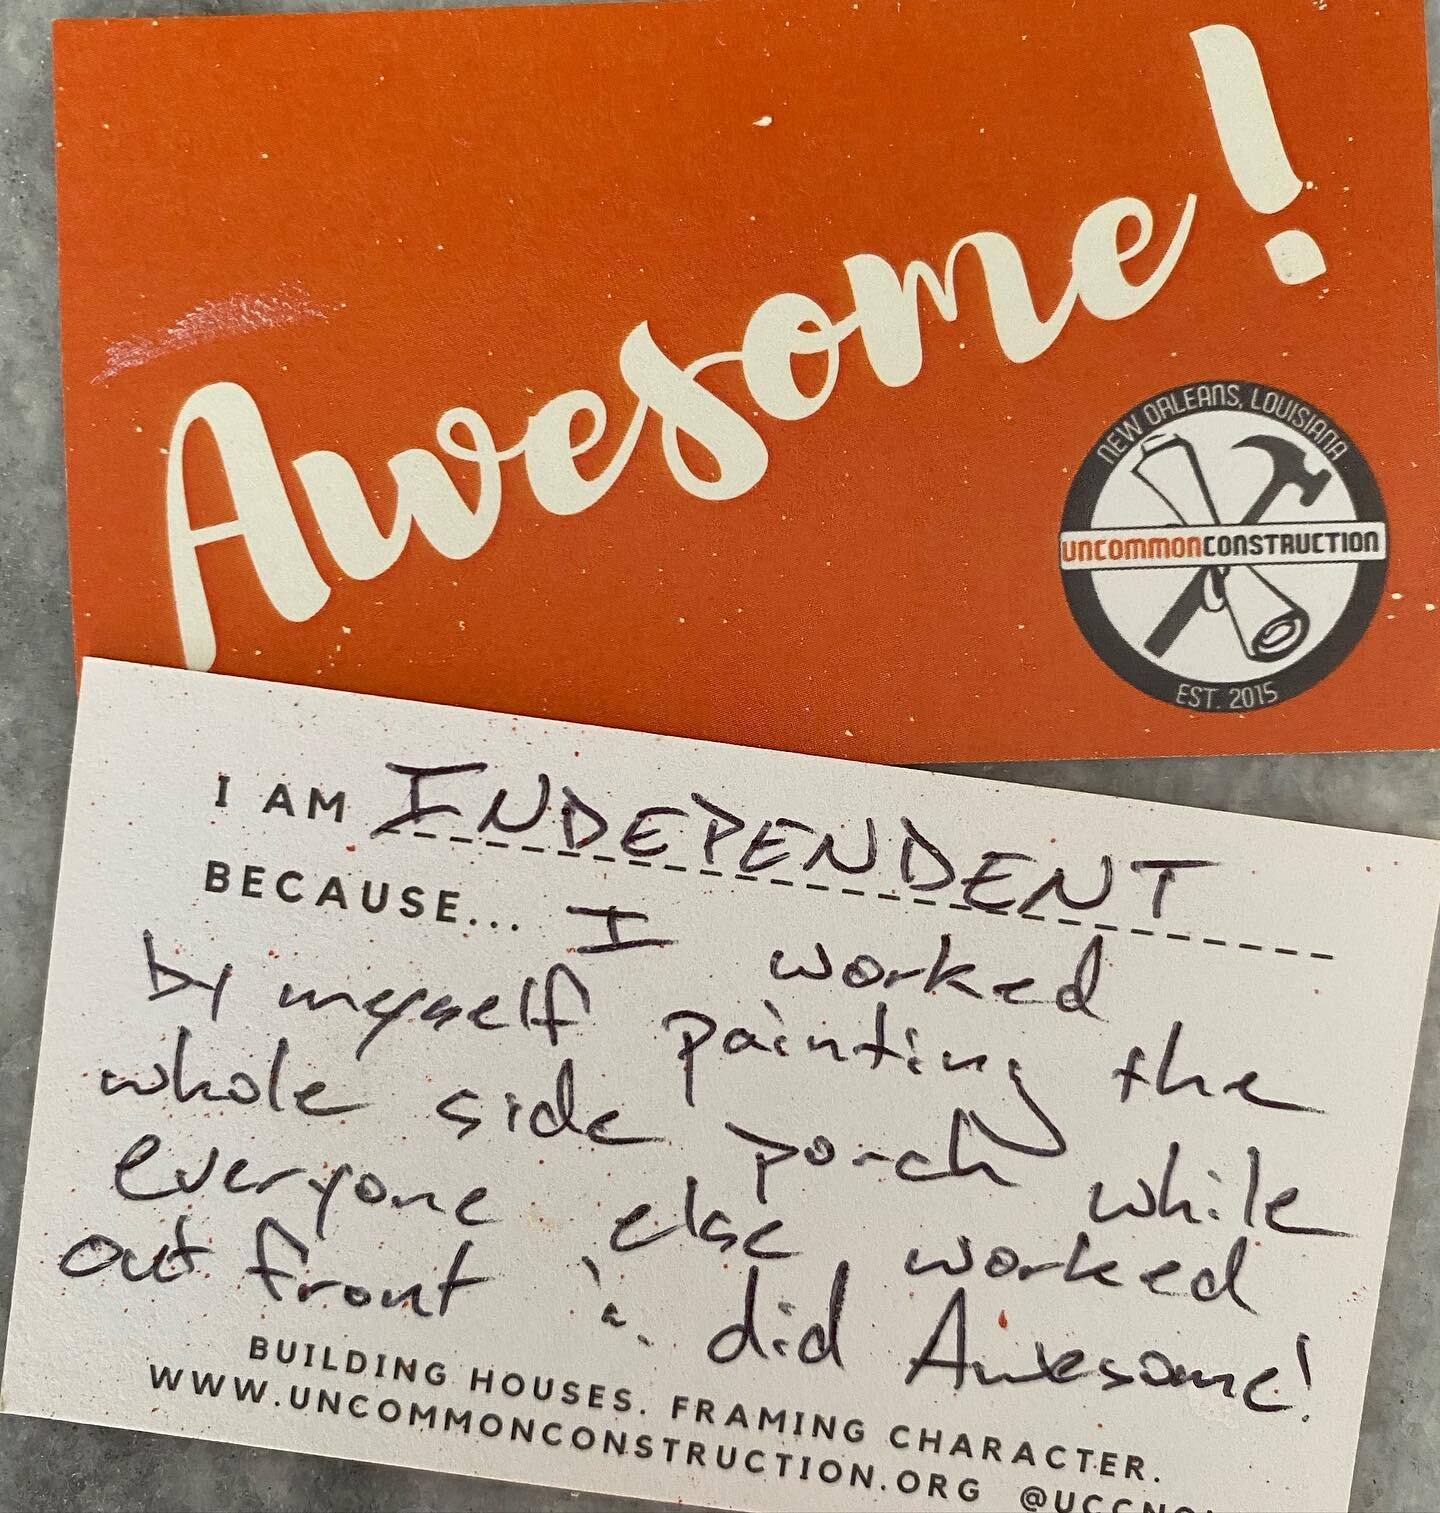 You&rsquo;re awesome! We see a lot of examples of awesomeness from our young people on the build site and shout them out using these awesome cards. 

Check out our IG story to see more examples of how apprentices are doing awesome work today!

#workf